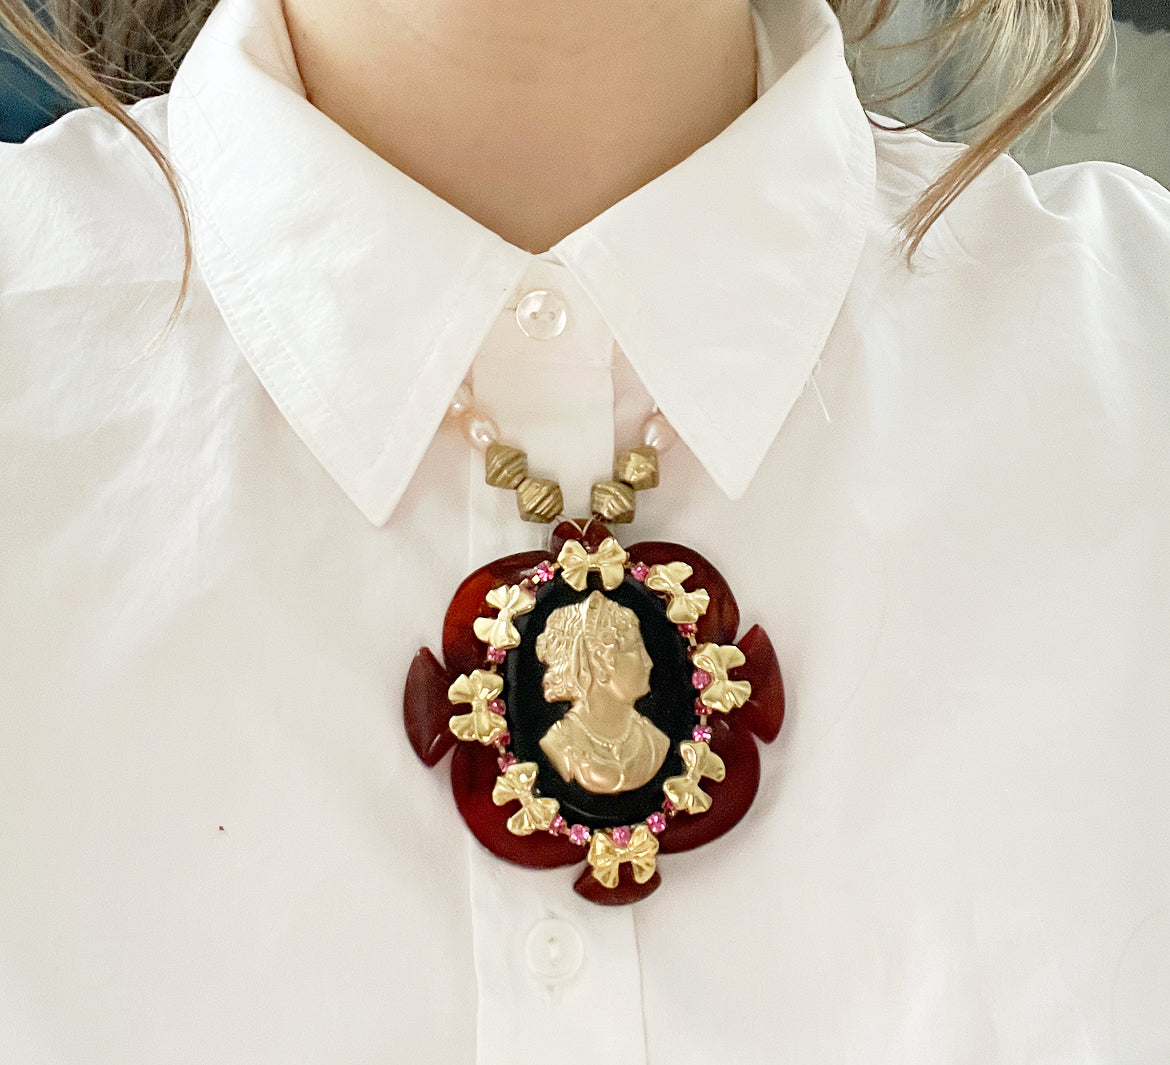 Darling bow cameo necklace